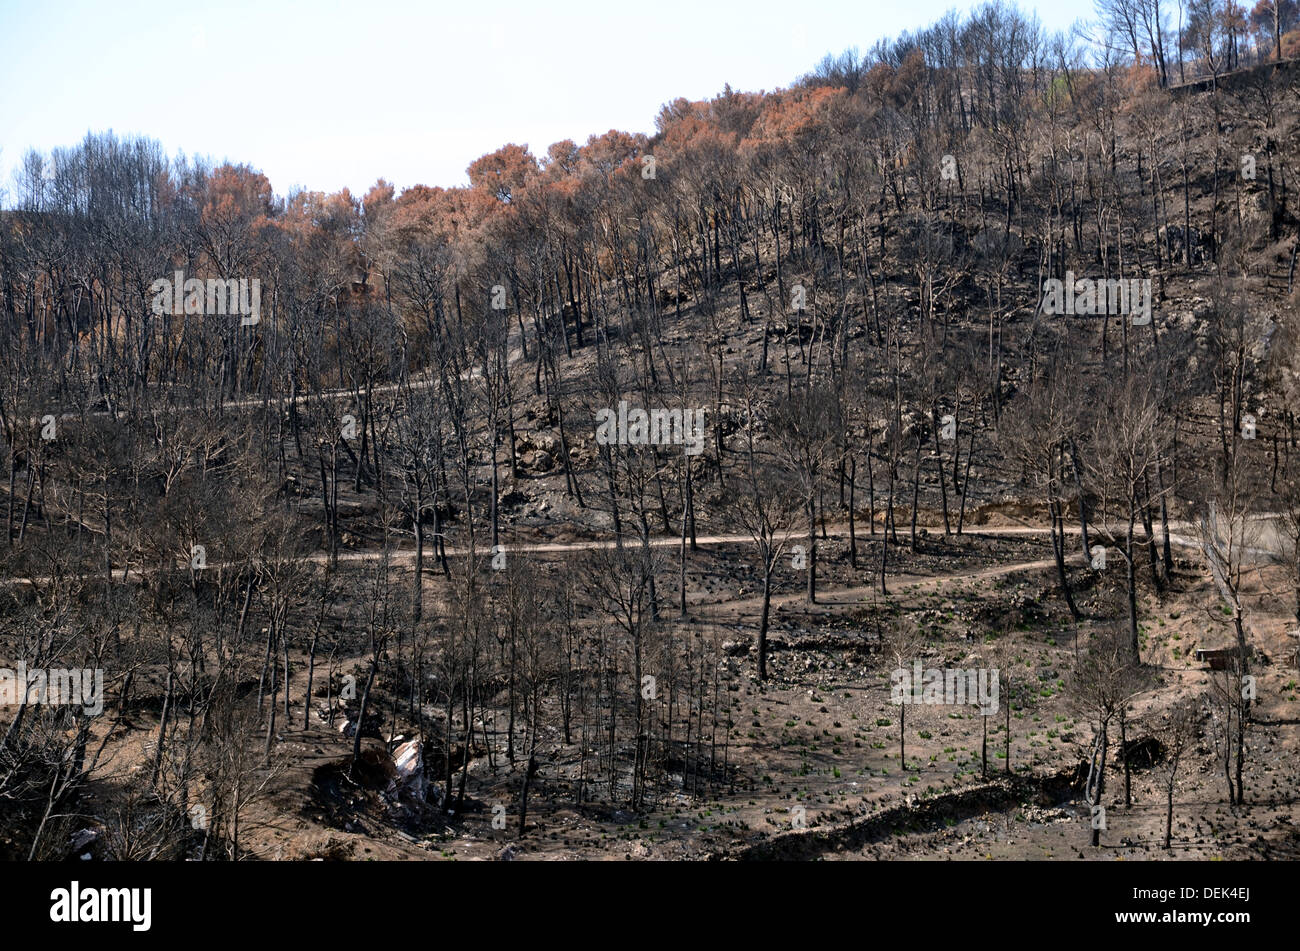 A pine and holm oak forest, destroyed by fire, in the Andratx and Extellencs regions in the Tramontane mountains on Majorca. Picture from 4 September 2013. Stock Photo